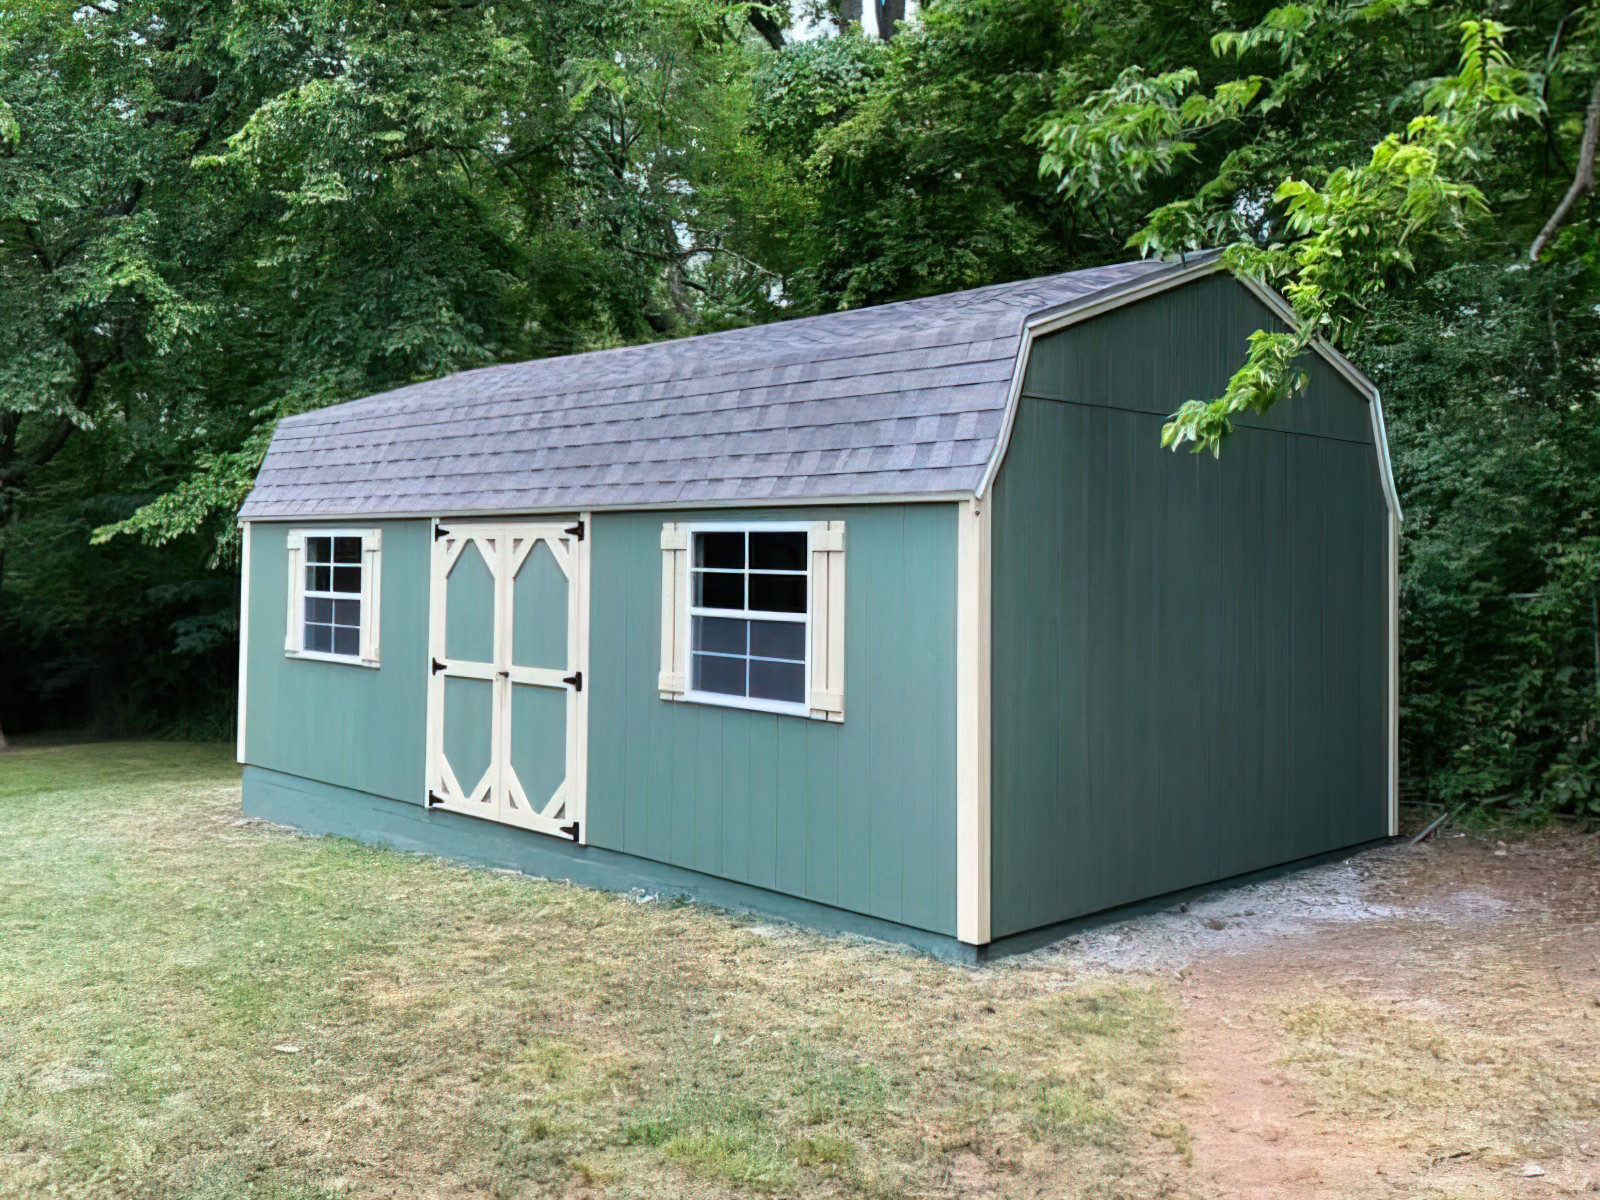 custom wood shed in woods in arkansas gigapixel low res scale 2 00x